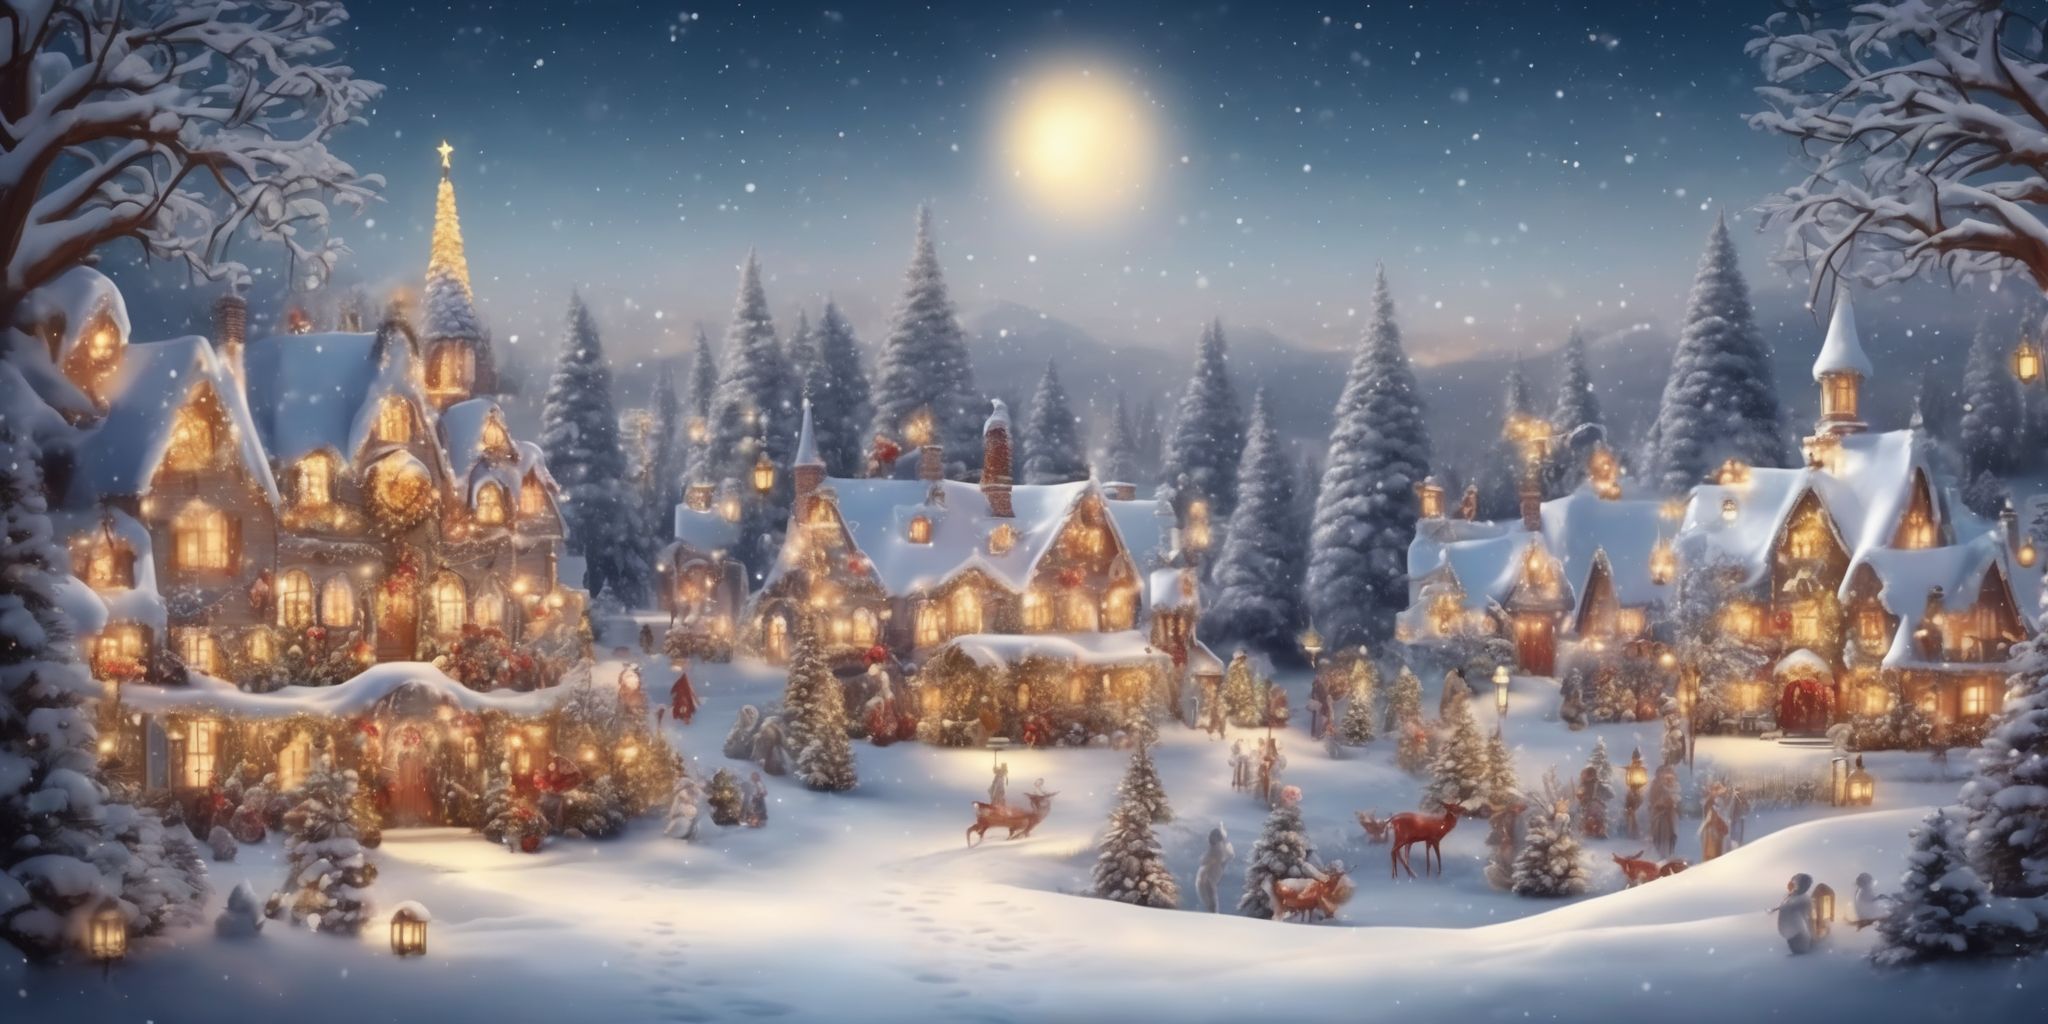 Fairyland in realistic Christmas style